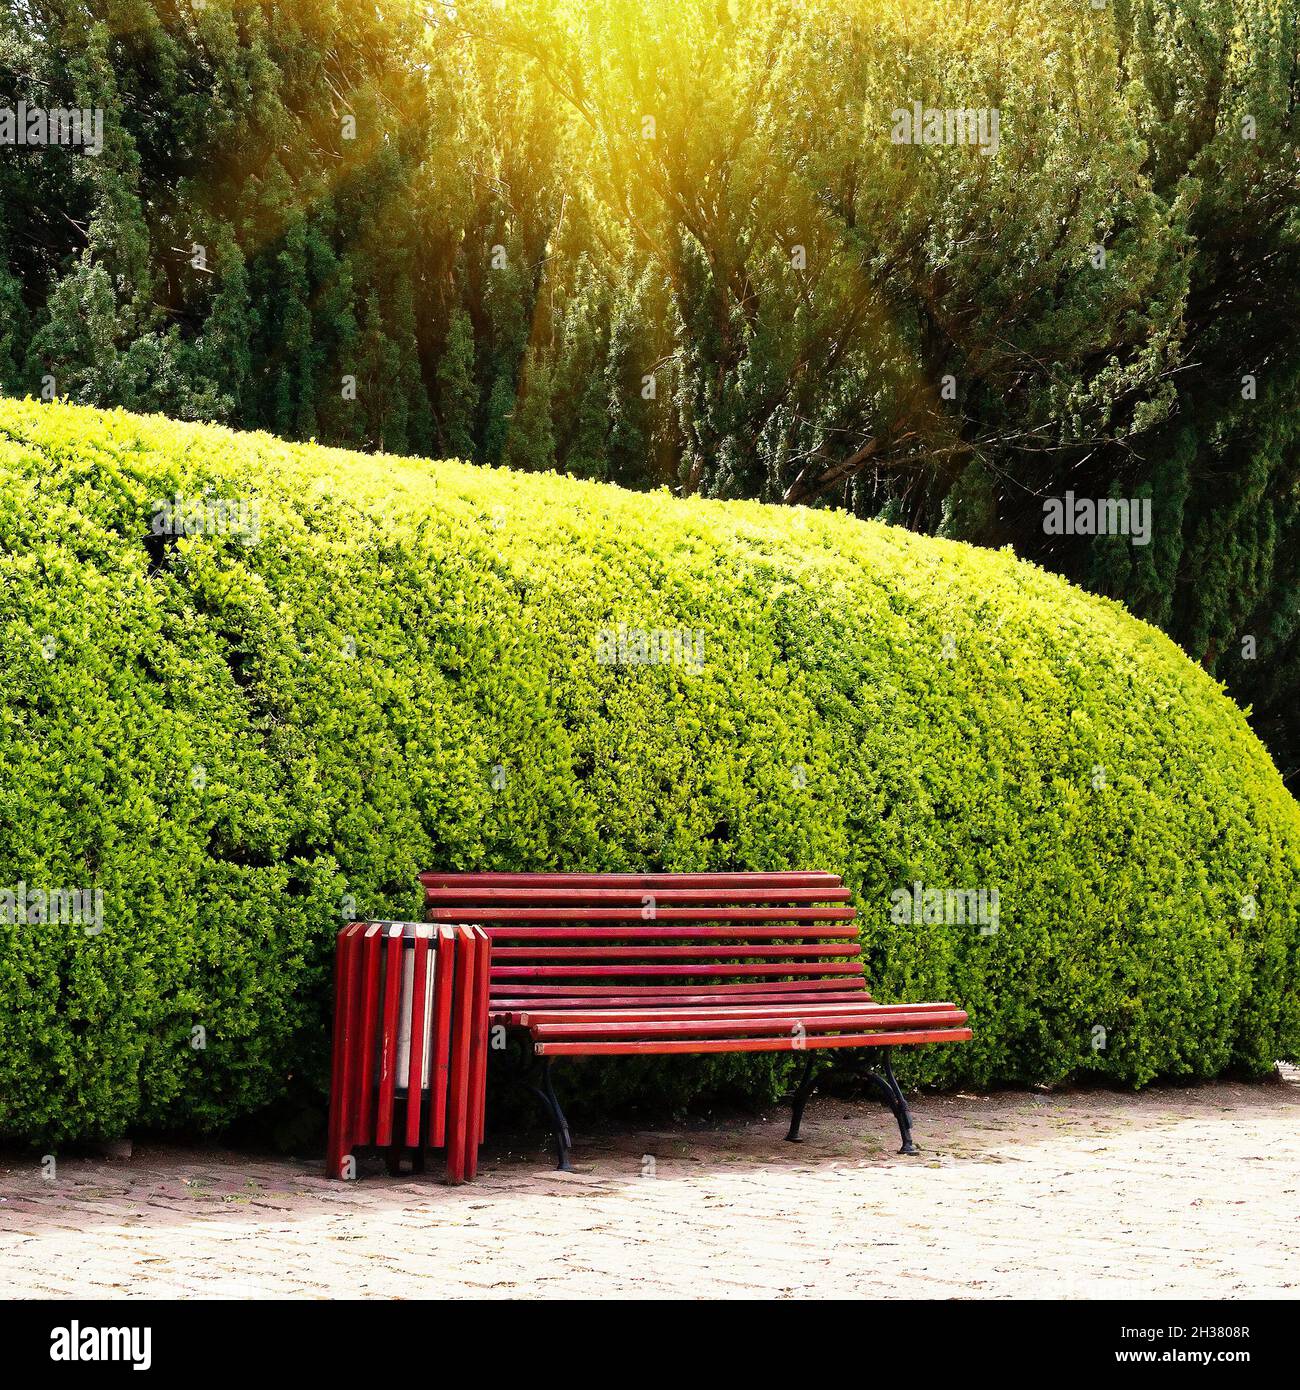 Wooden bench on the background trimmed evergreen shrub in a public park. Summertime. Landscape design concept Stock Photo